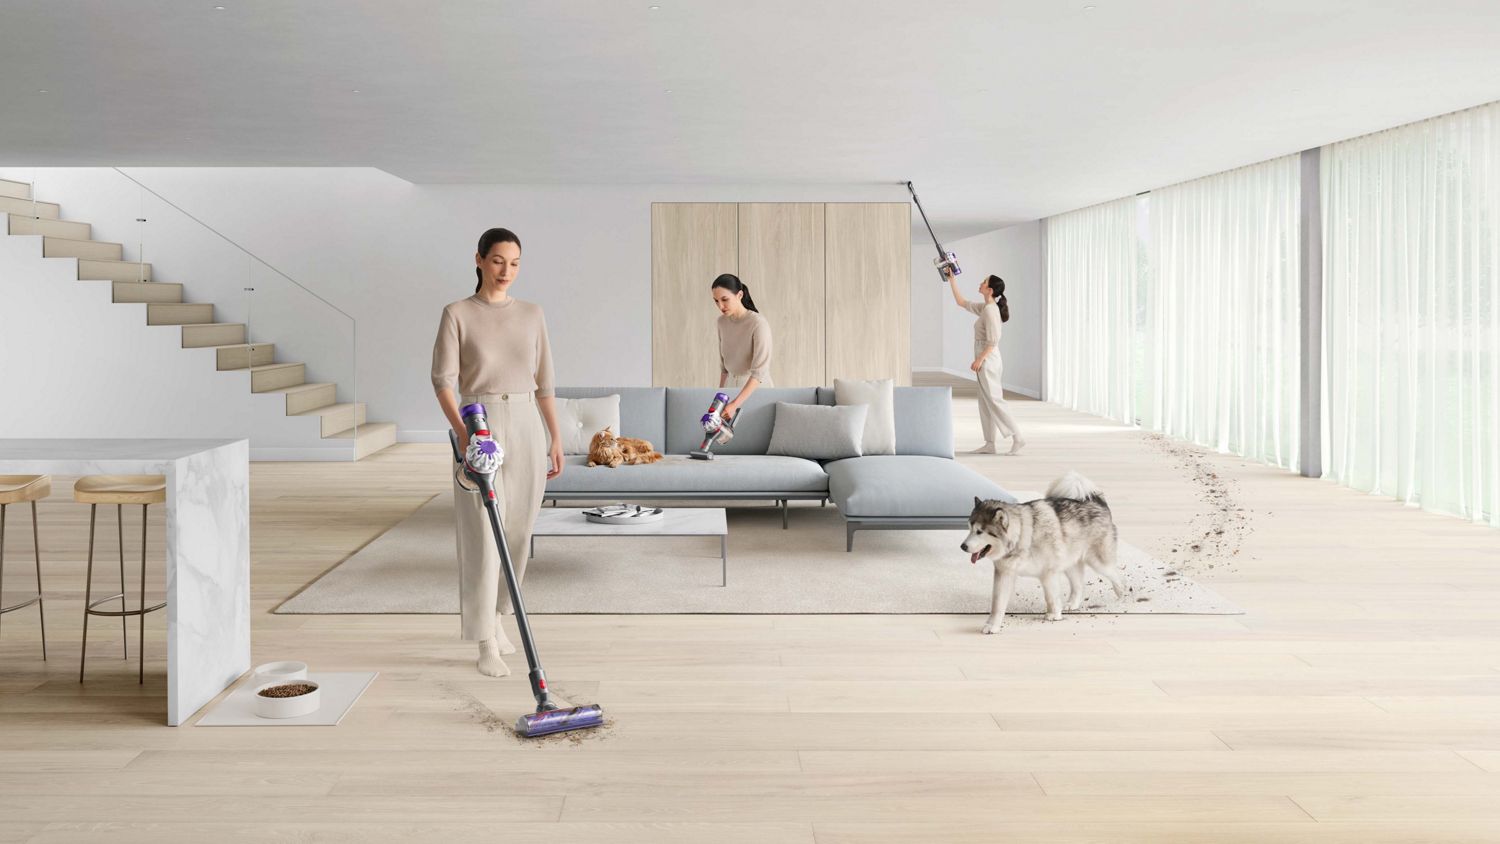 https://dyson-h.assetsadobe2.com/is/image/content/dam/dyson/products/cord-free-vacuums/sticks/dyson-v8-vacuums/Gallery/285L_1_gallery_versatility_MTB_MMT.jpg